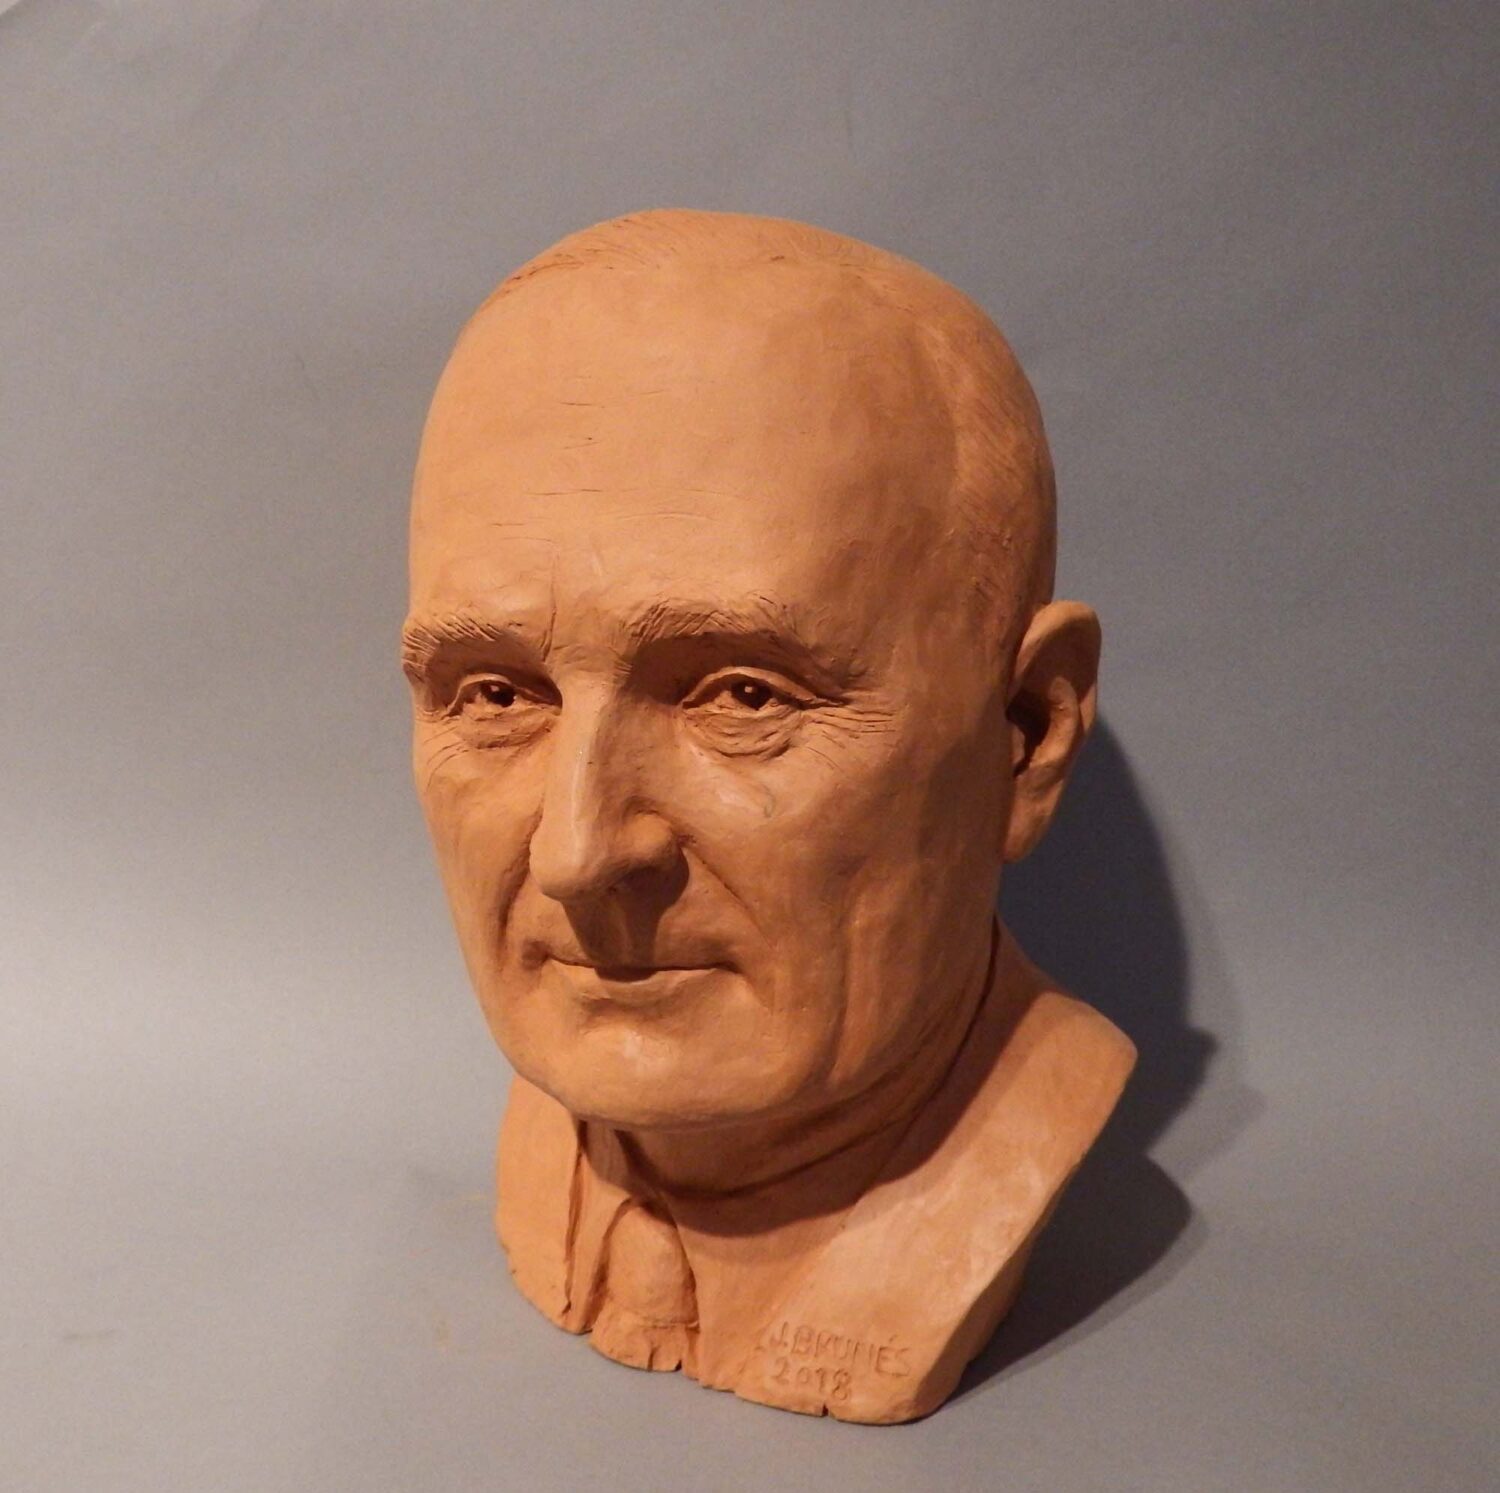 thumbnail of Sculpture of Harry S. Truman made out of Terra cotta